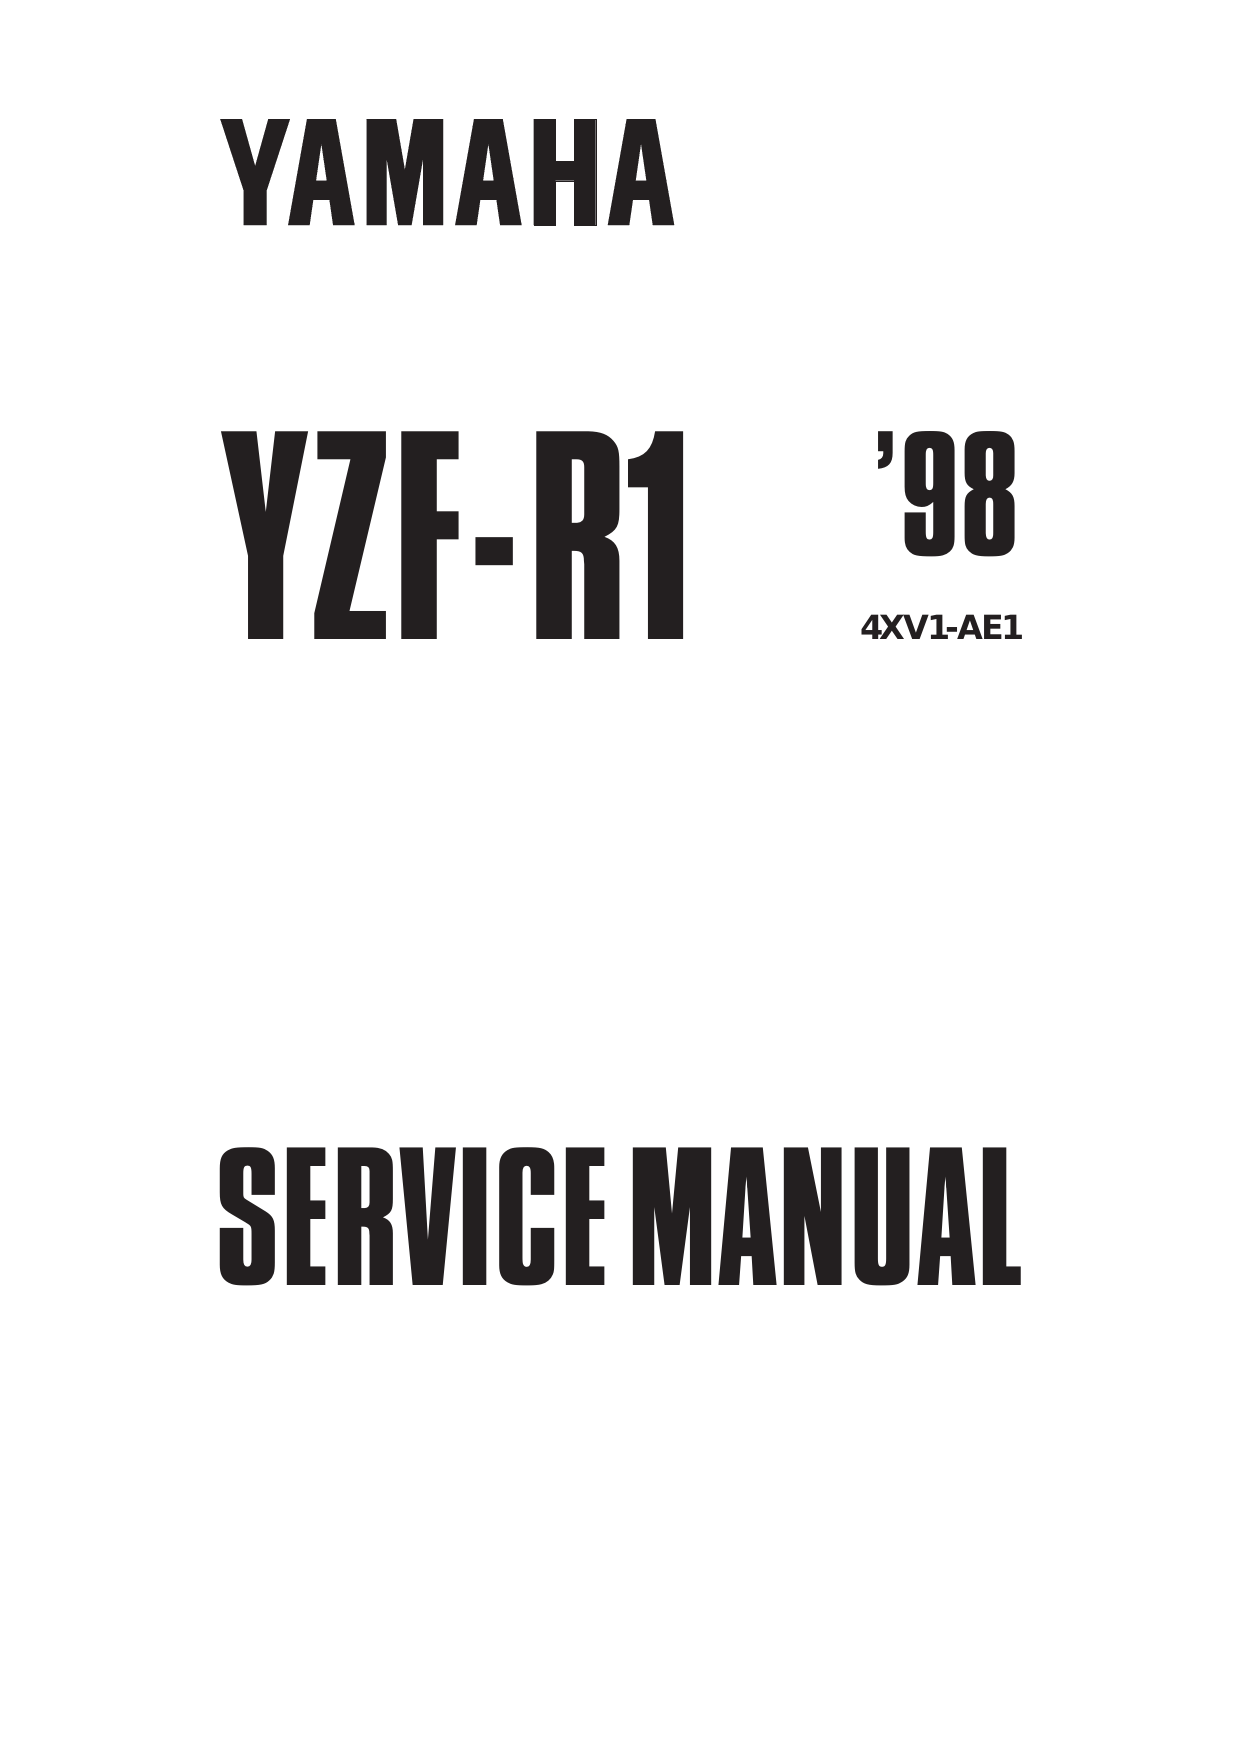 1998-2001 Yamaha YZF-R1 service manual Preview image 6